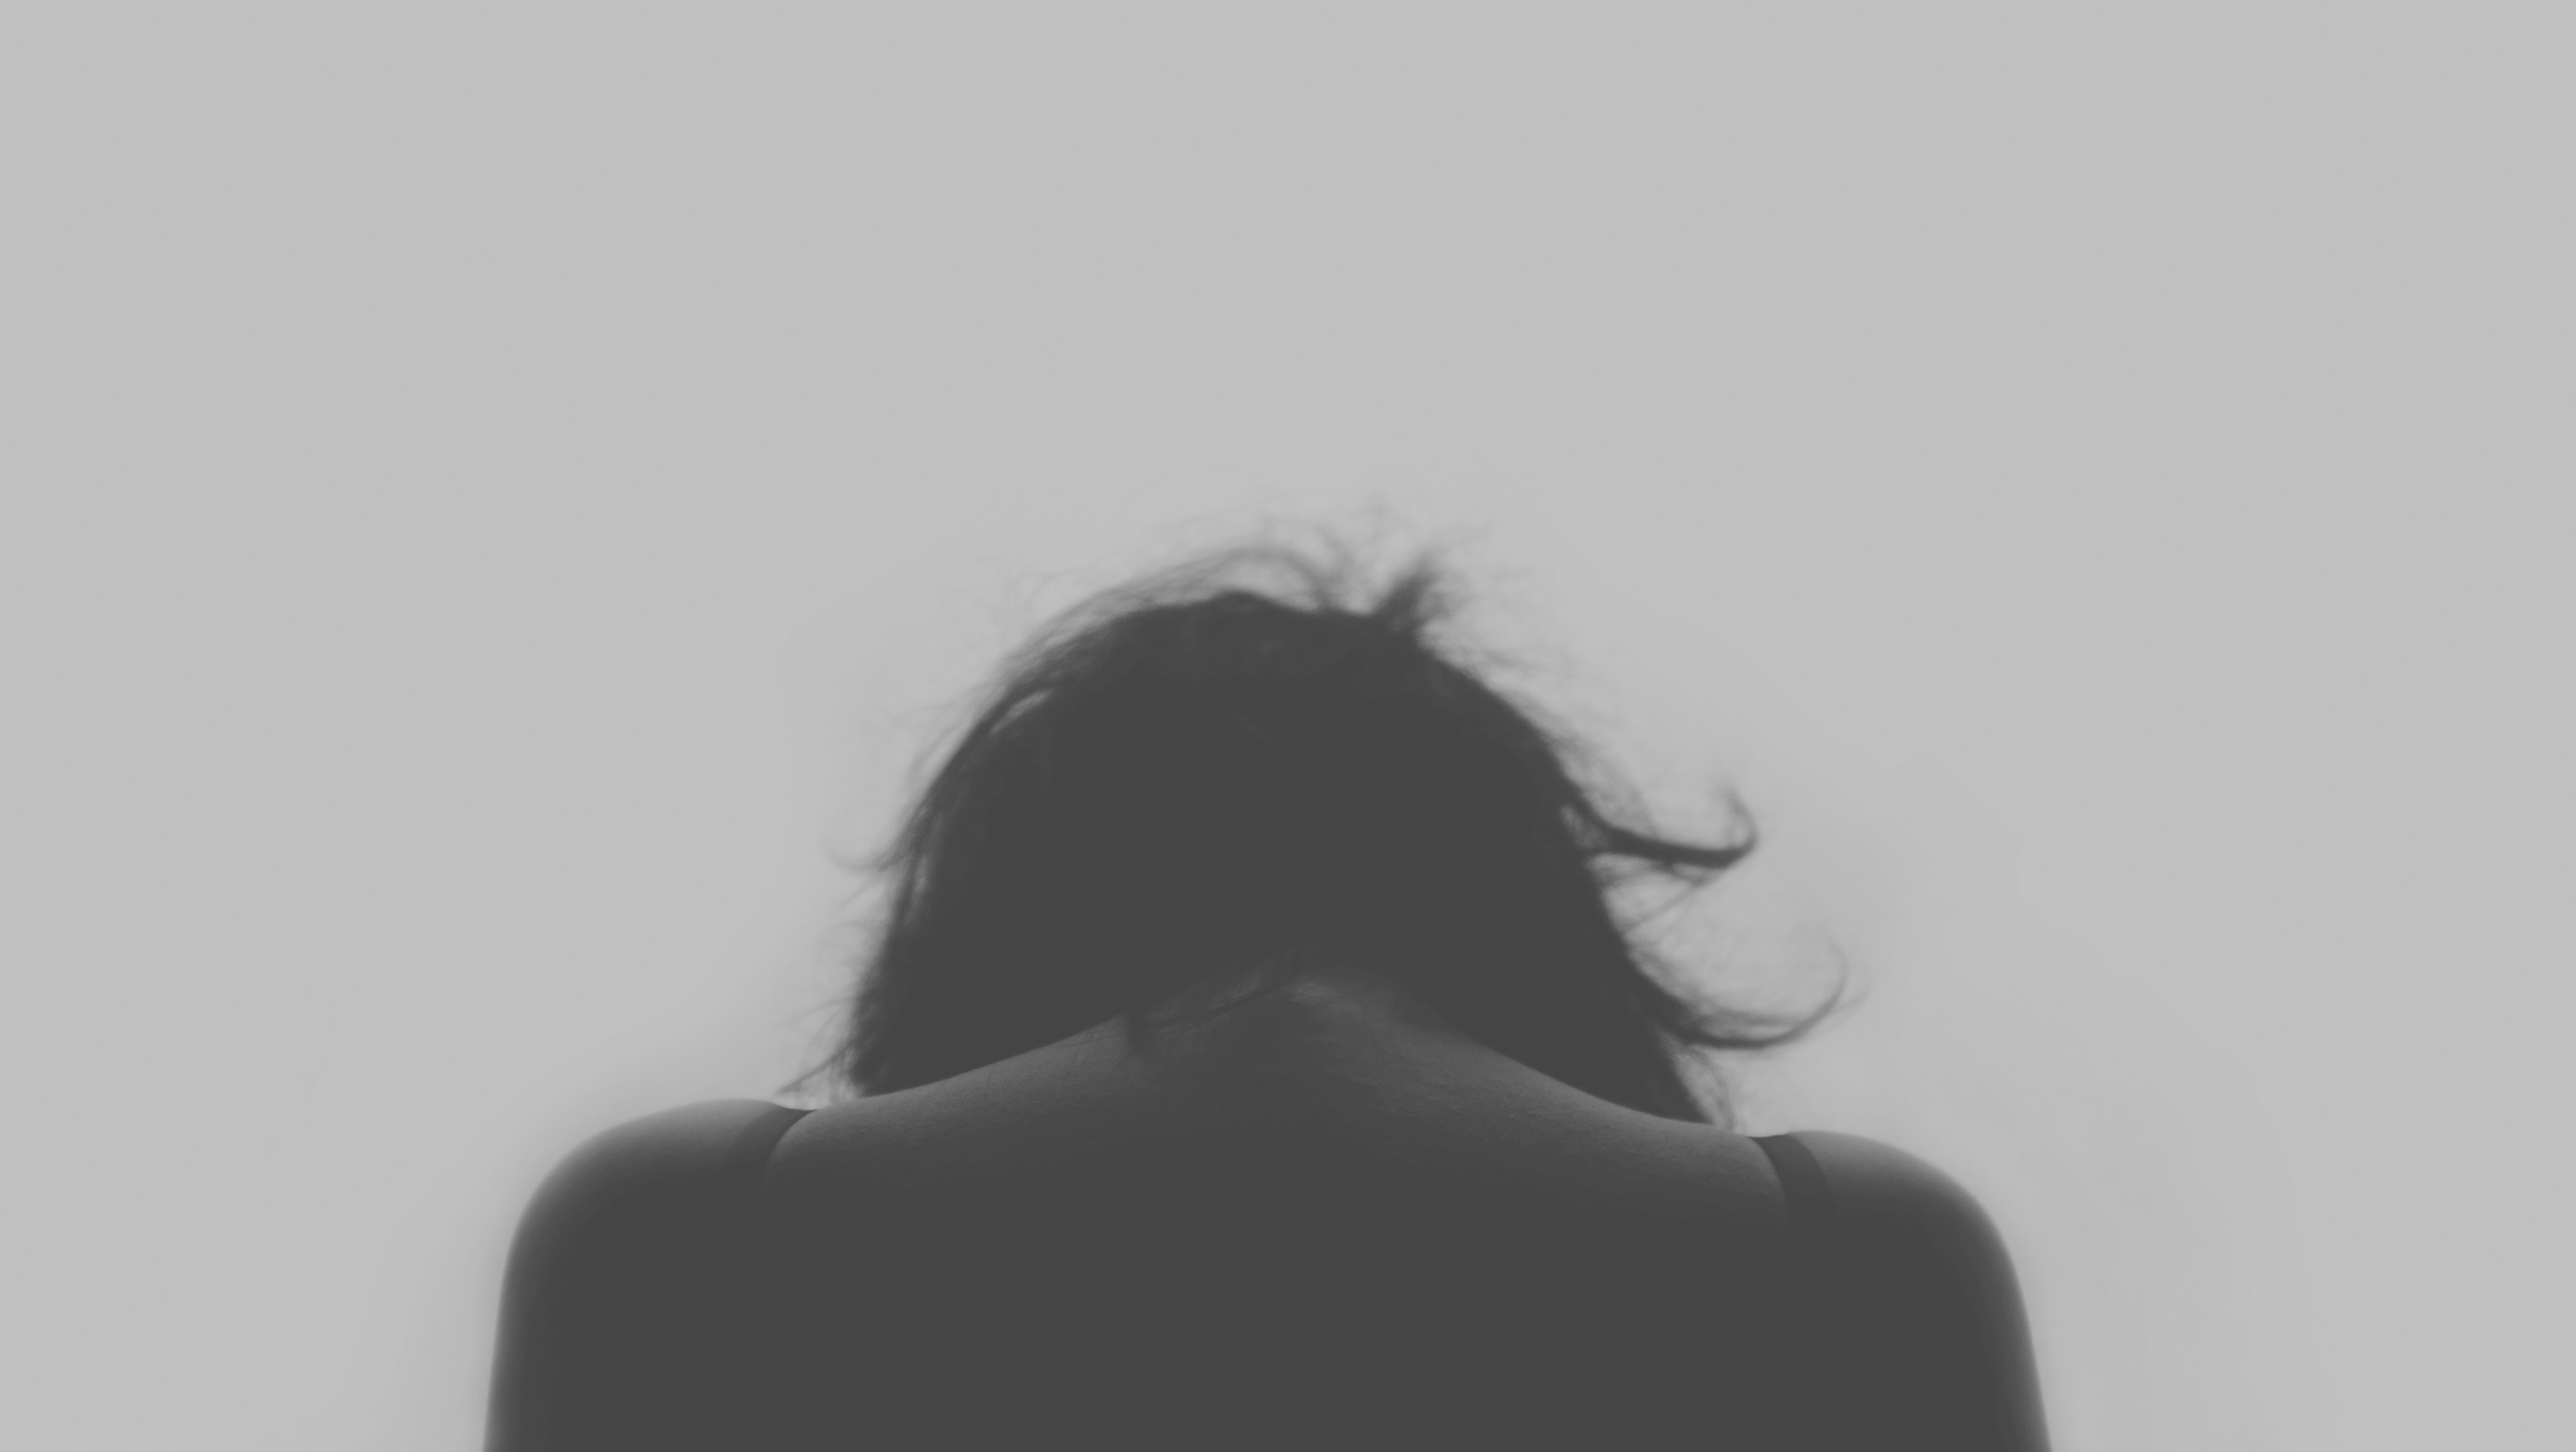 4896x2760 Back, Blak And White, Grey, Minimal, Behind, Moody, Female, Woman, Backless, Black & White, Nape, B W, Sadness, Gray, Hair, Girl, Shoulders, Black And White, Free Image, Person, Head